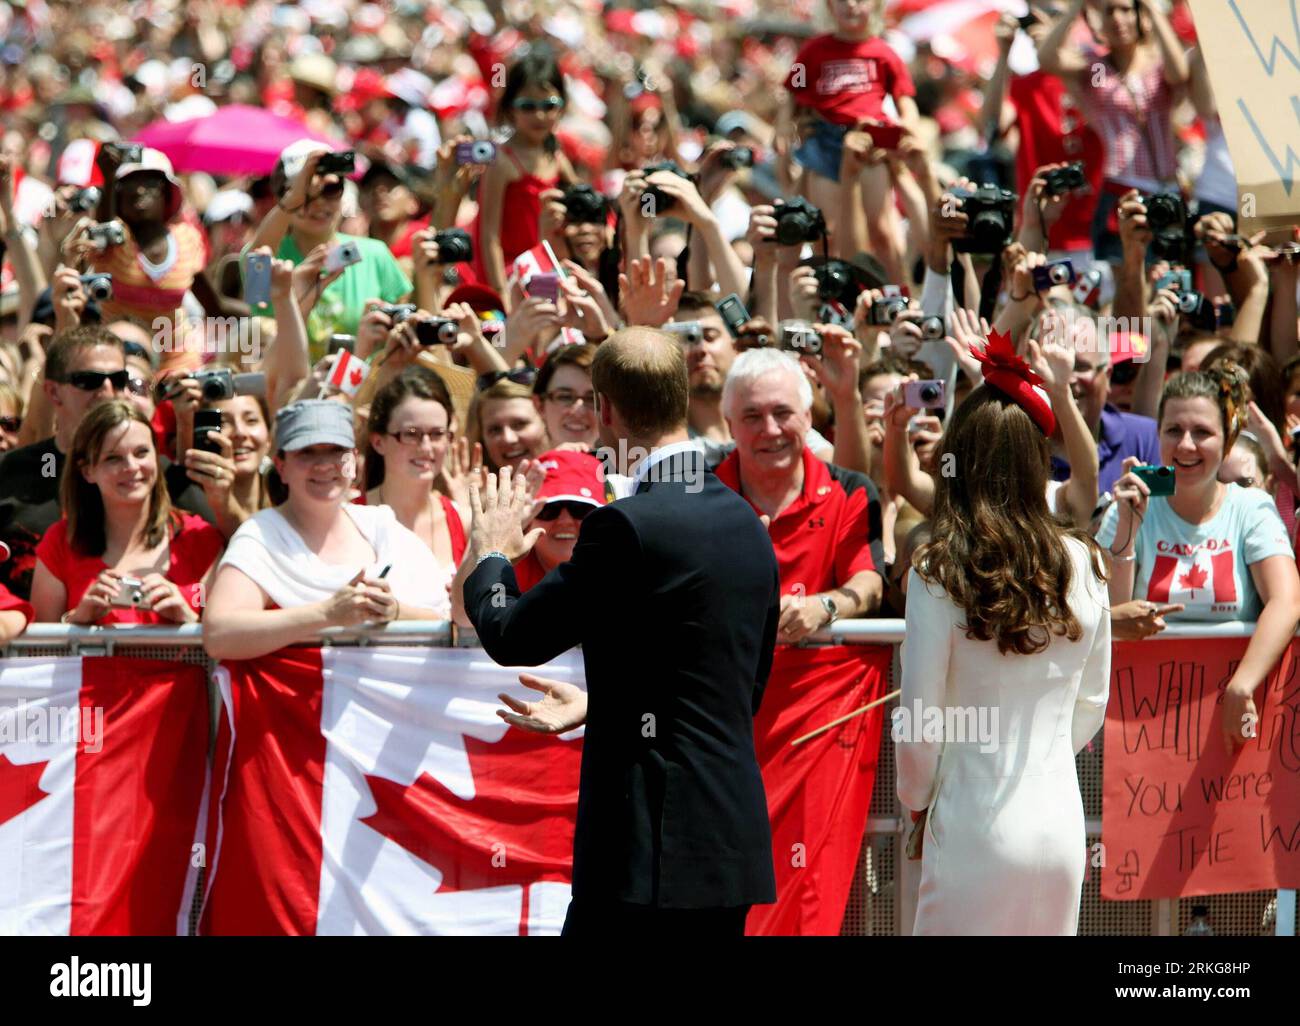 Bildnummer: 55565300  Datum: 01.07.2011  Copyright: imago/Xinhua (110702)-- OTTAWA, July 2, 2011 (Xinhua) -- Britain s Prince William and his wife Kate greet Canadians during the 144th Canada Day celebrations on Parliament Hill in Ottawa, Canada, on July 1, 2011. The Royal couple is on a nine-day official visit to Canada, their first overseas trip since being married.(Xinhua/Zhang Dacheng)(zl) CANADA-CANADA DAY-CELEBRATION PUBLICATIONxNOTxINxCHN People Entertainment Adel GBR Königshaus Familie Frau Ehefrau Kate Ehemann Mann xda x0x premiumd Middleton 2011 quer   Catherine Duchess Cambridge Stock Photo